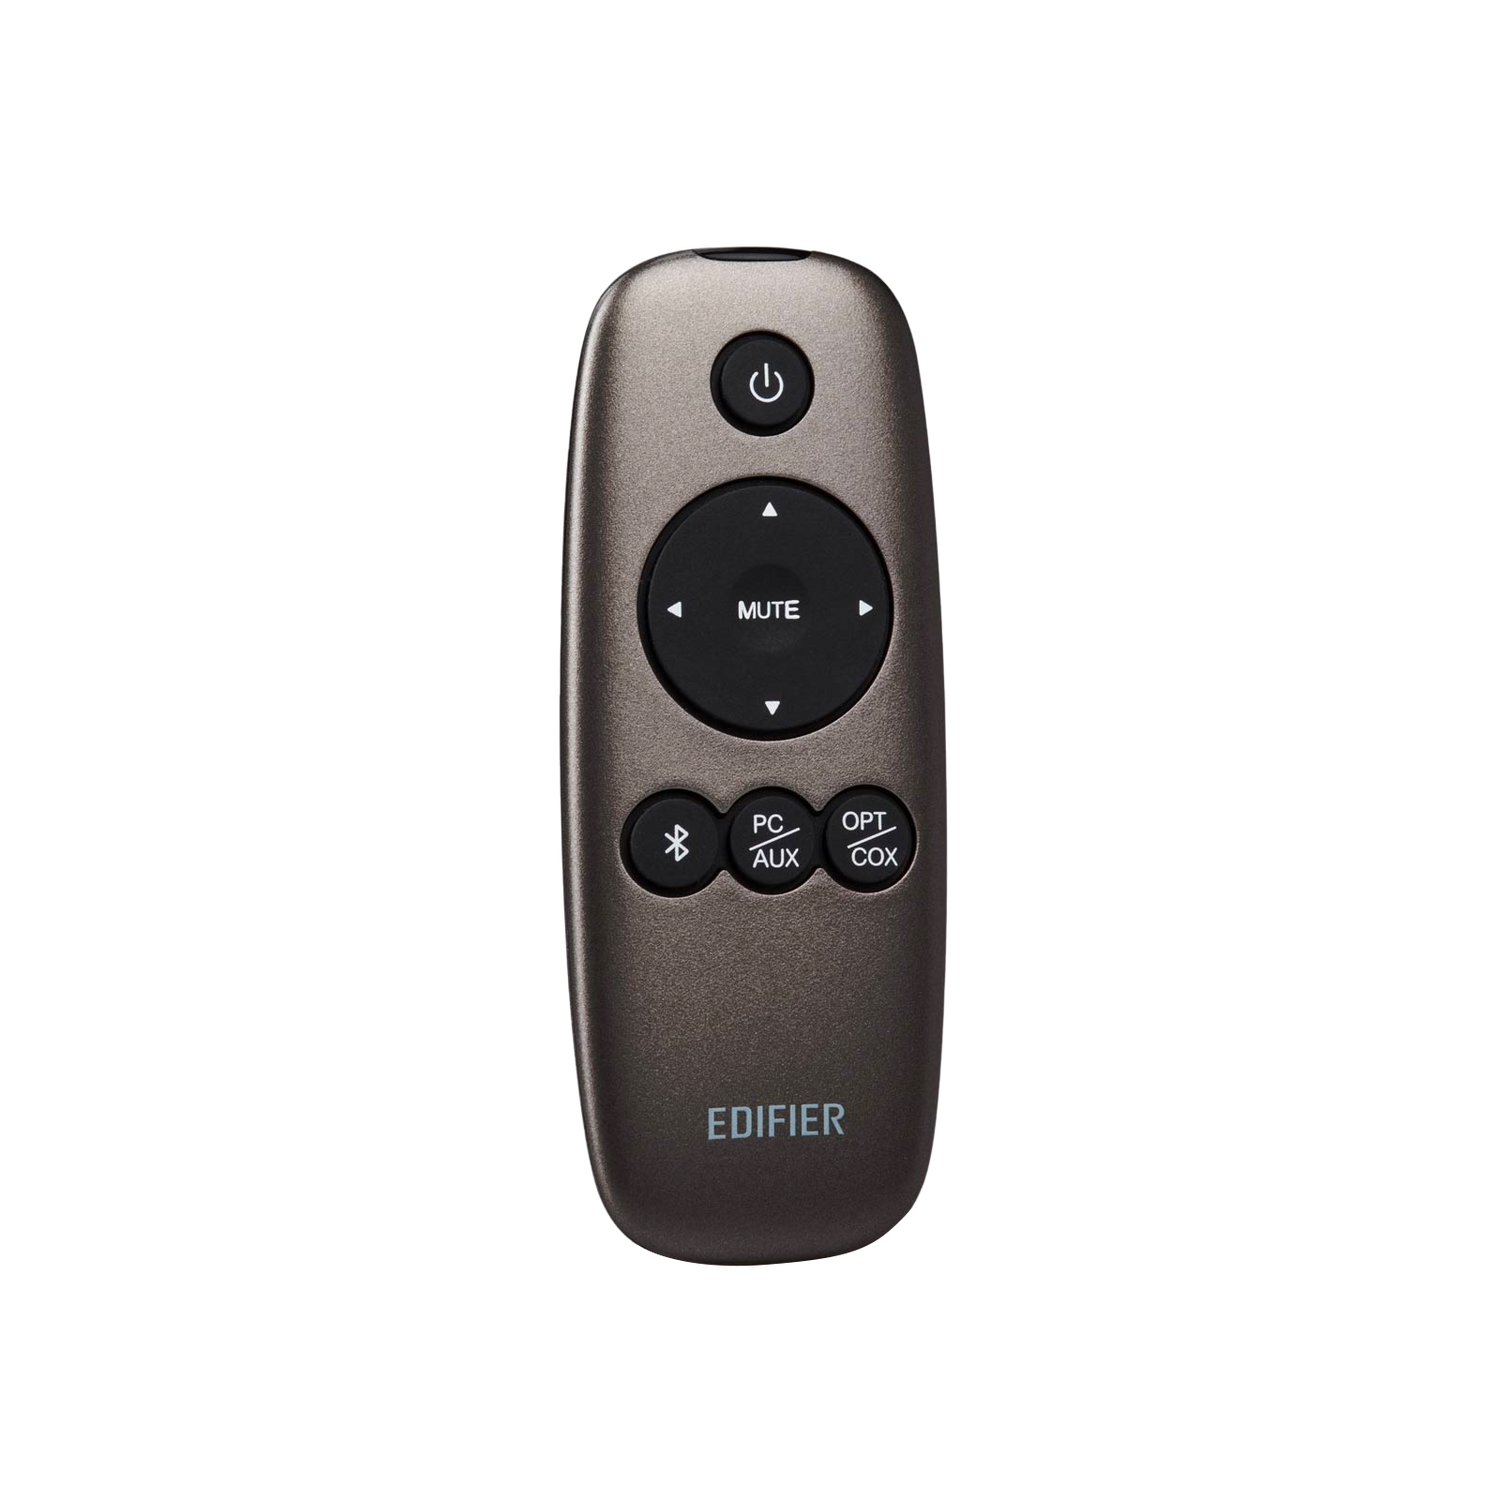 Remote - S1000DB Fully Functional Wireless Remote for The S1000DB